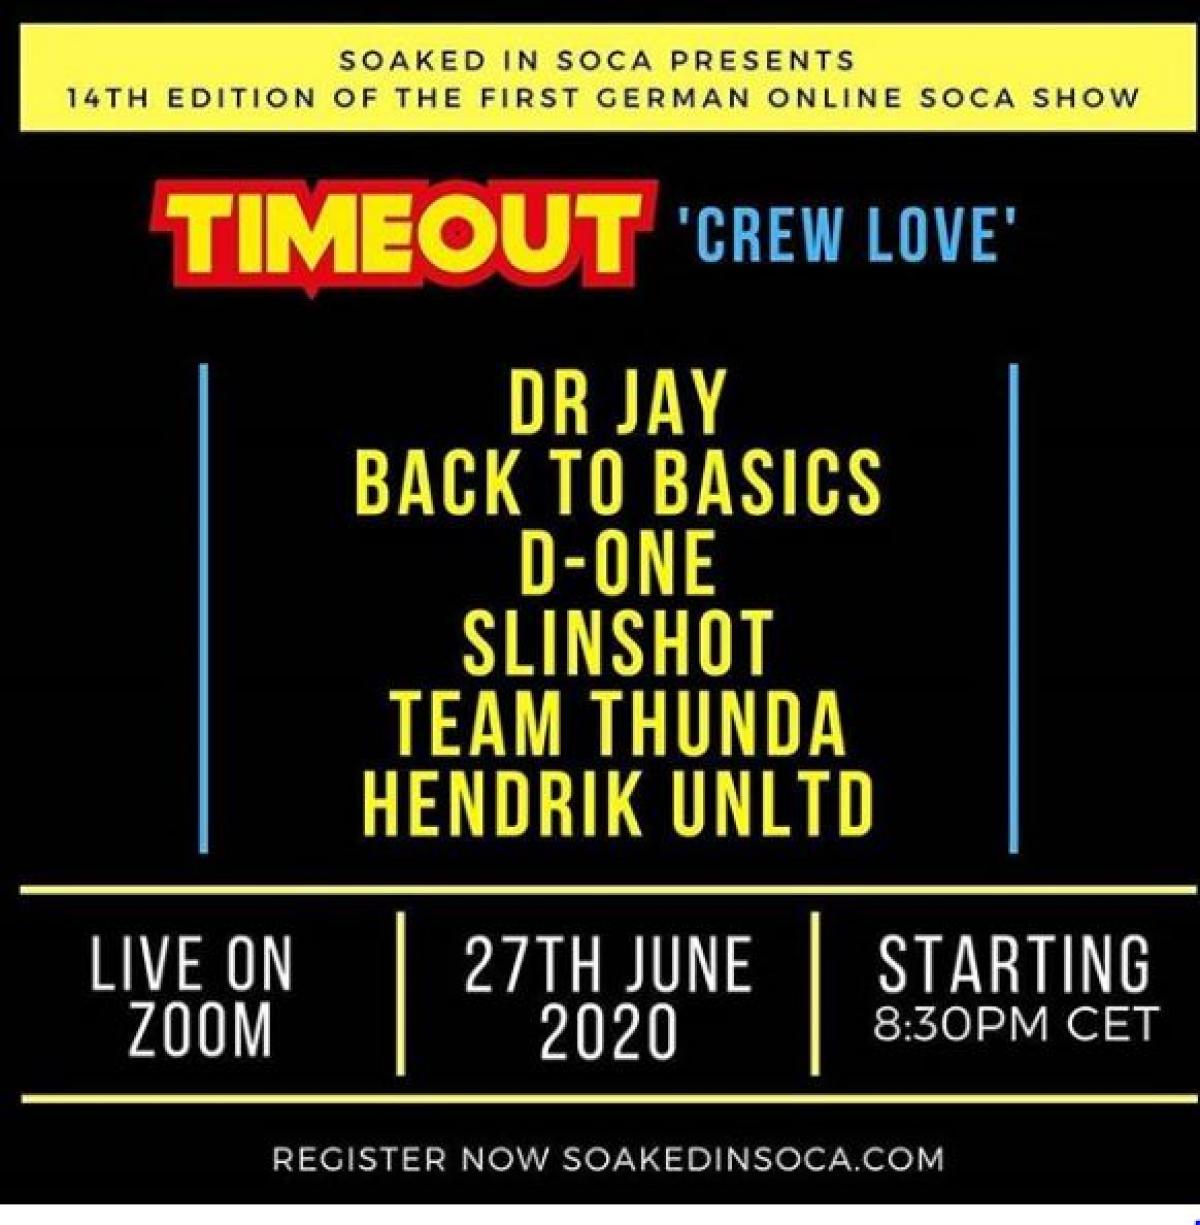 Timeout "Crew Love" flyer or graphic.